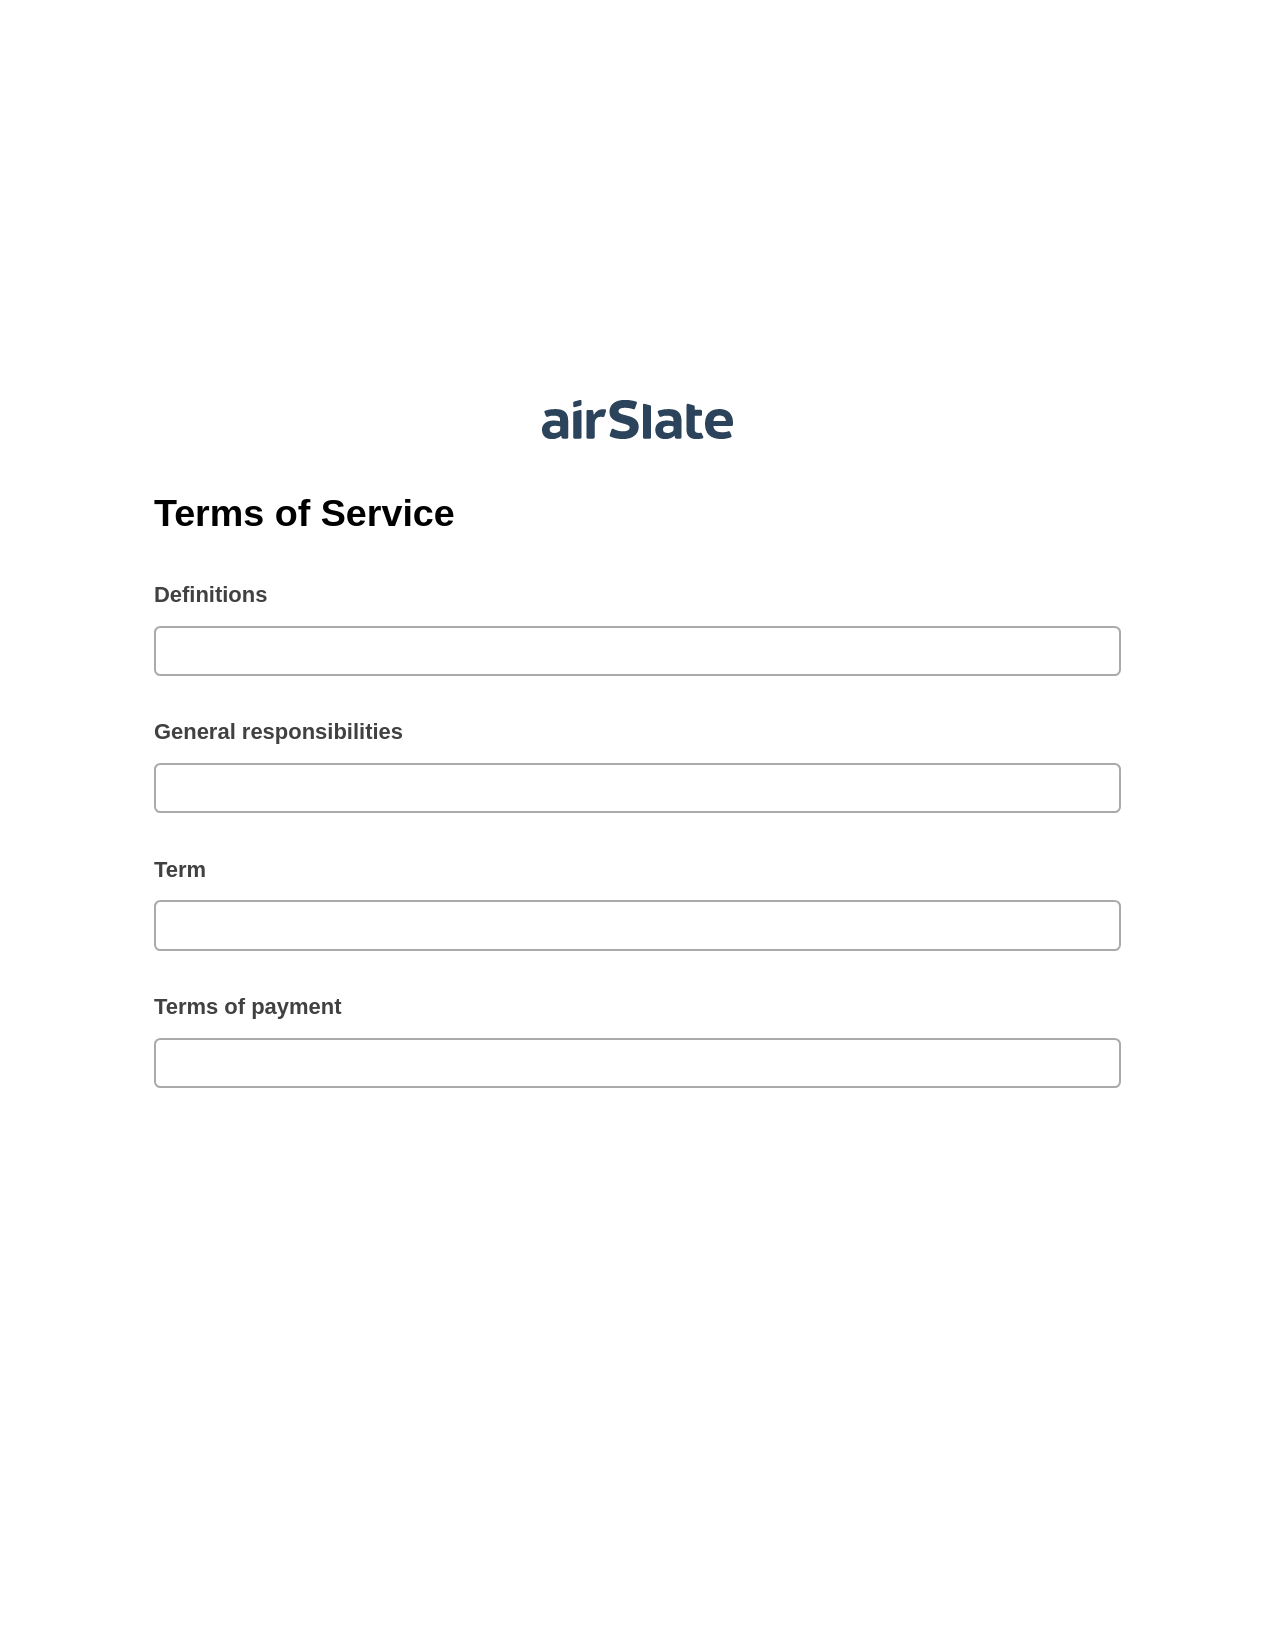 Multirole Terms of Service Pre-fill Slate from Microsoft Dynamics 365 Records Bot, 1Create Slate every Google Sheet Update Bot, Archive to SharePoint Folder Bot